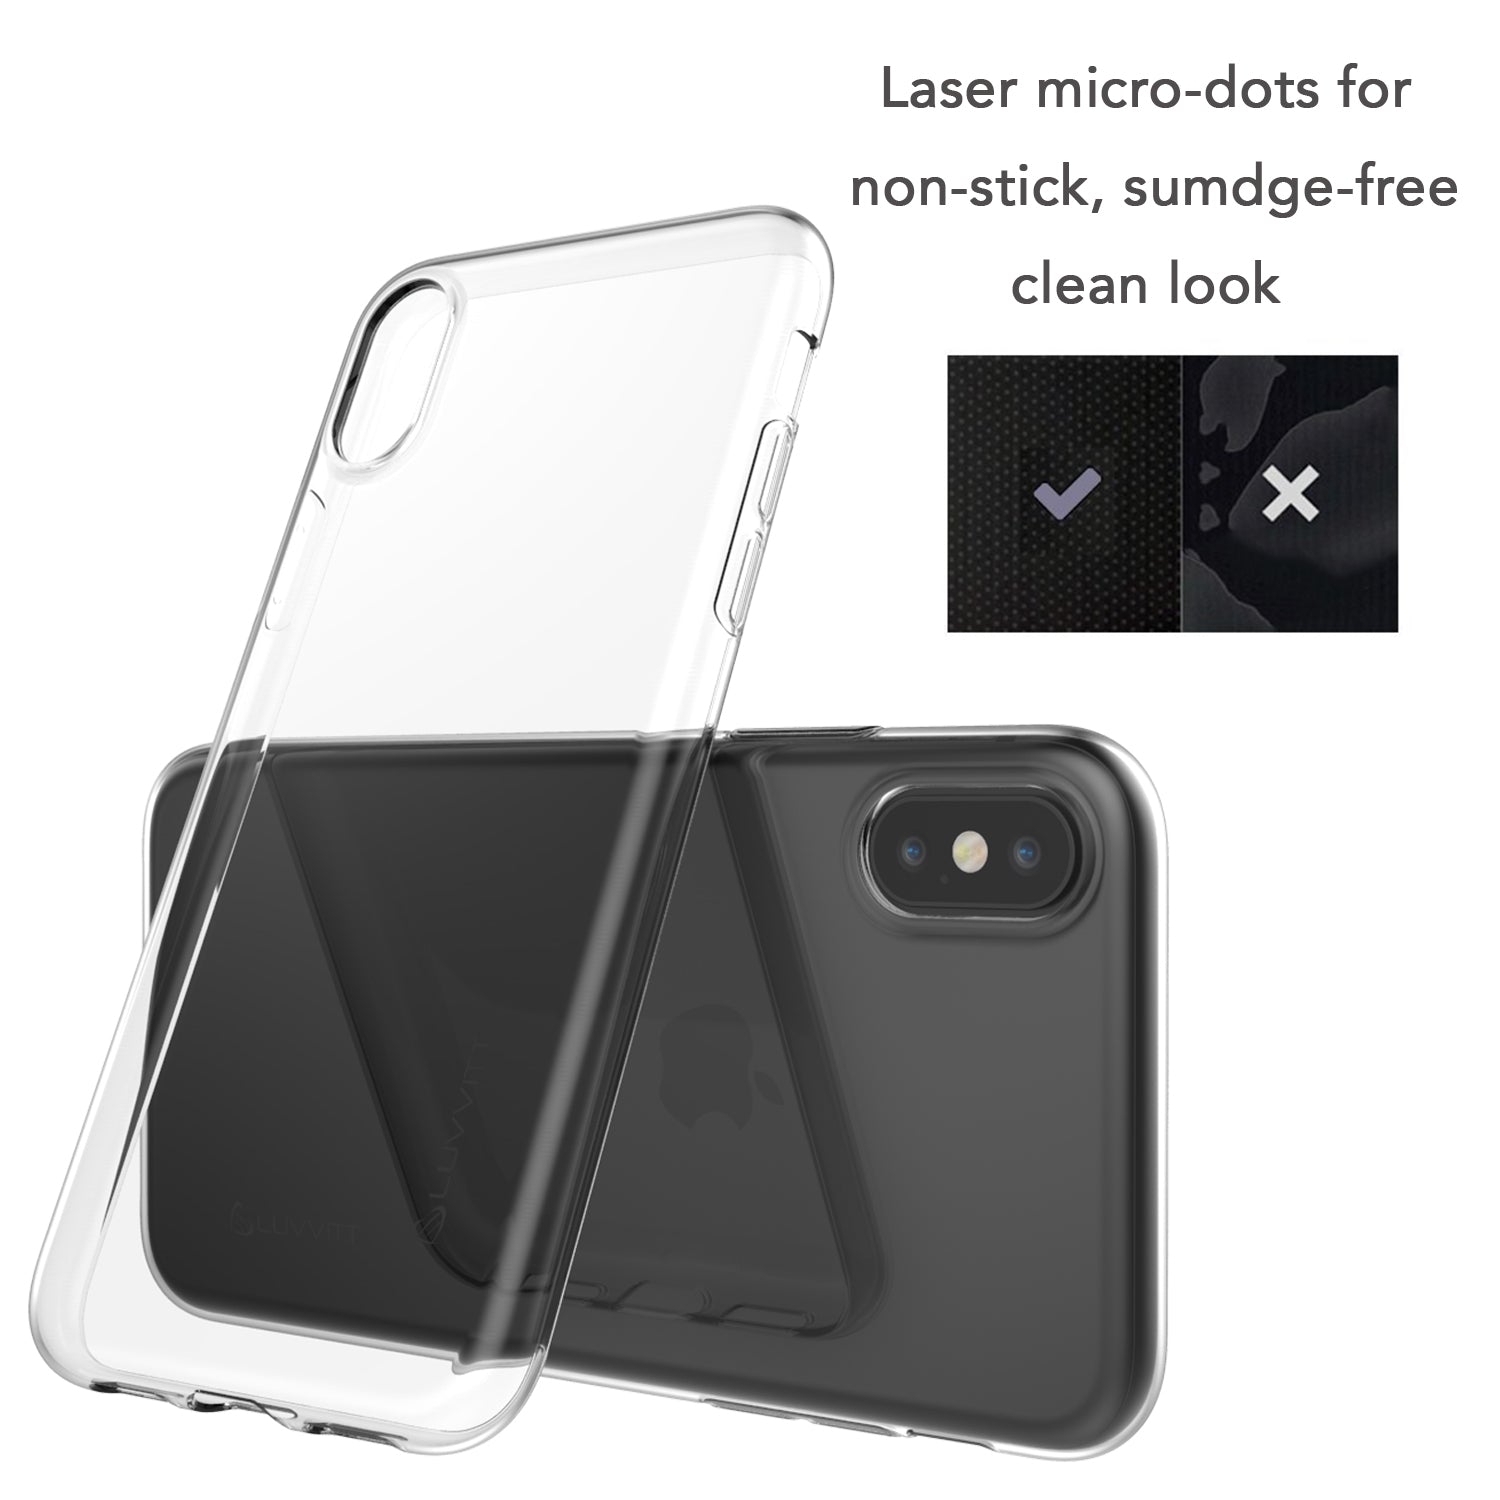 Luvvitt Clarity Case for iPhone X / XS Slim Flexible TPU Rubber Cover - 4 Pack Bundle